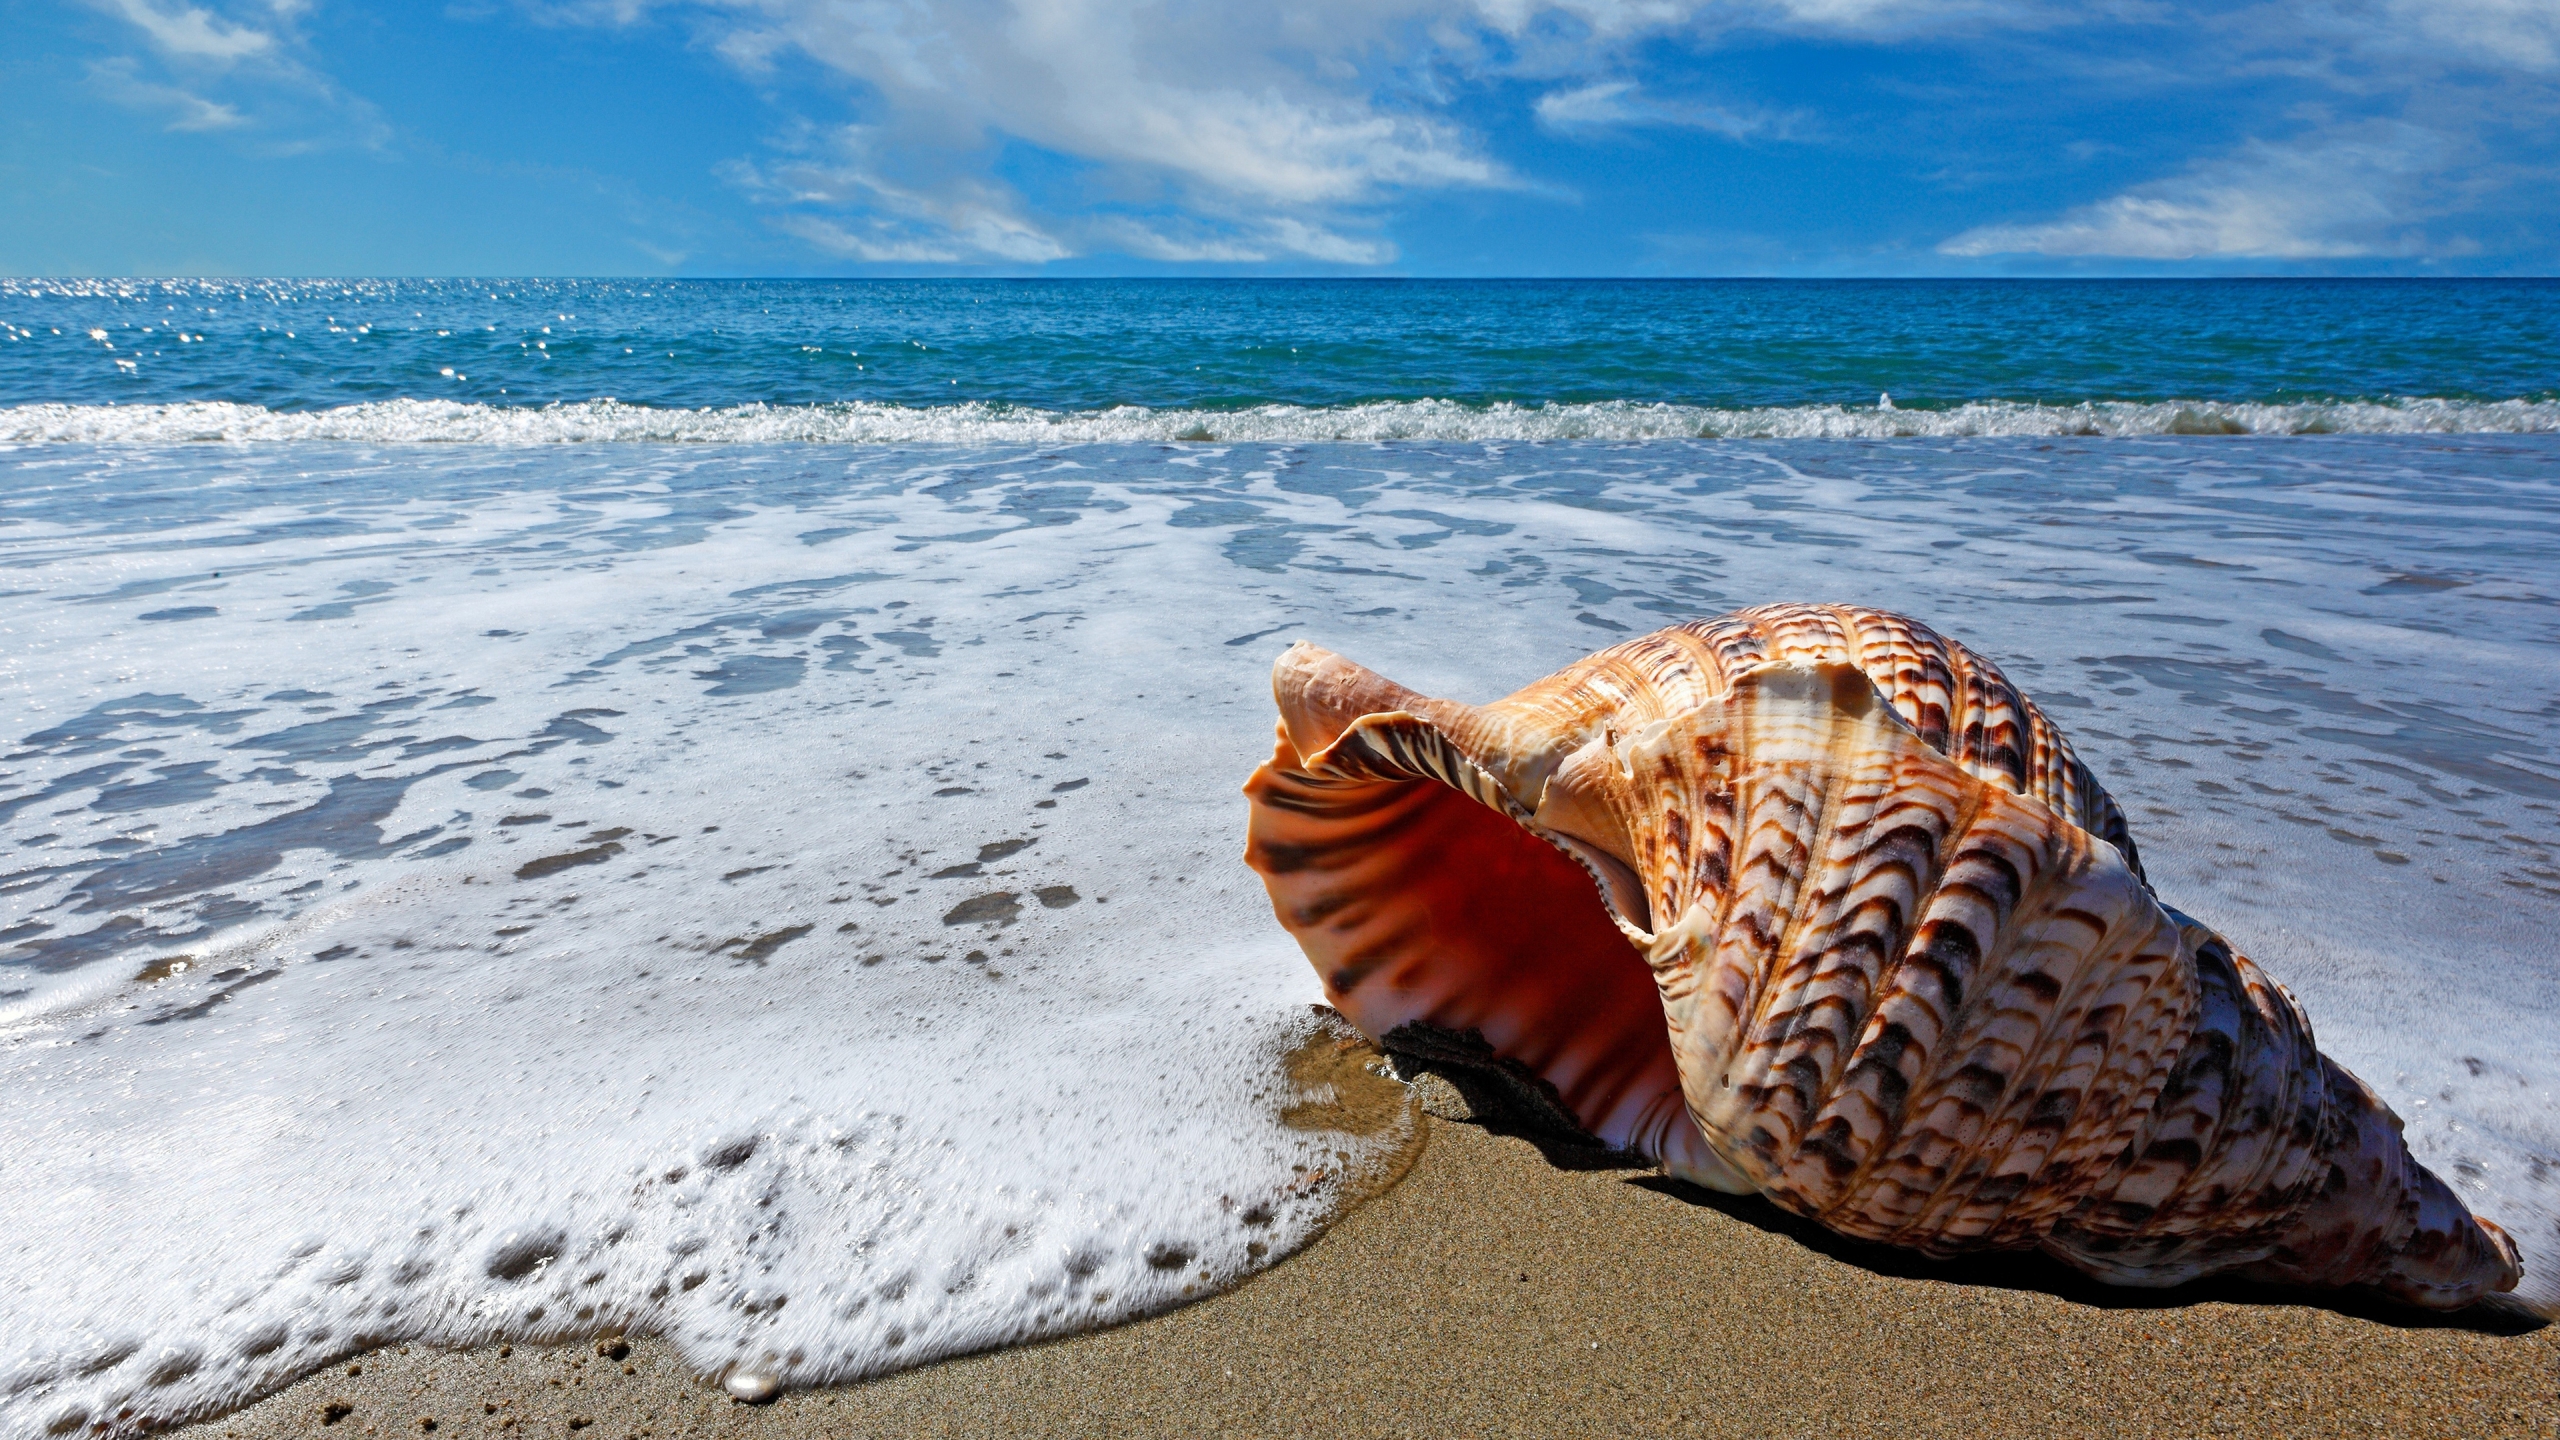 Sea Shell for 2560x1440 HDTV resolution